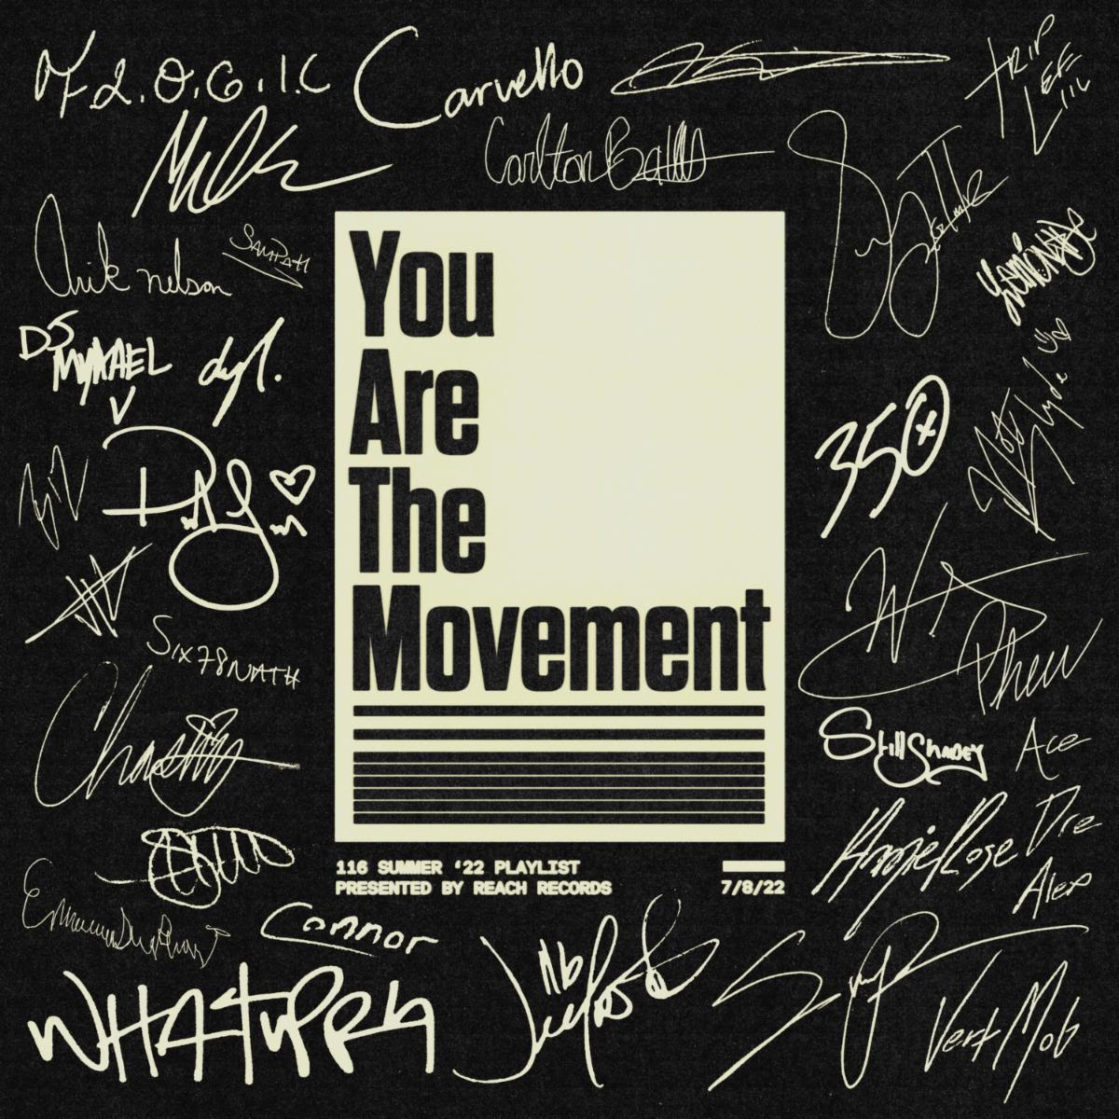 Reach Records-Summer 22 Playlist (You are The Movement)